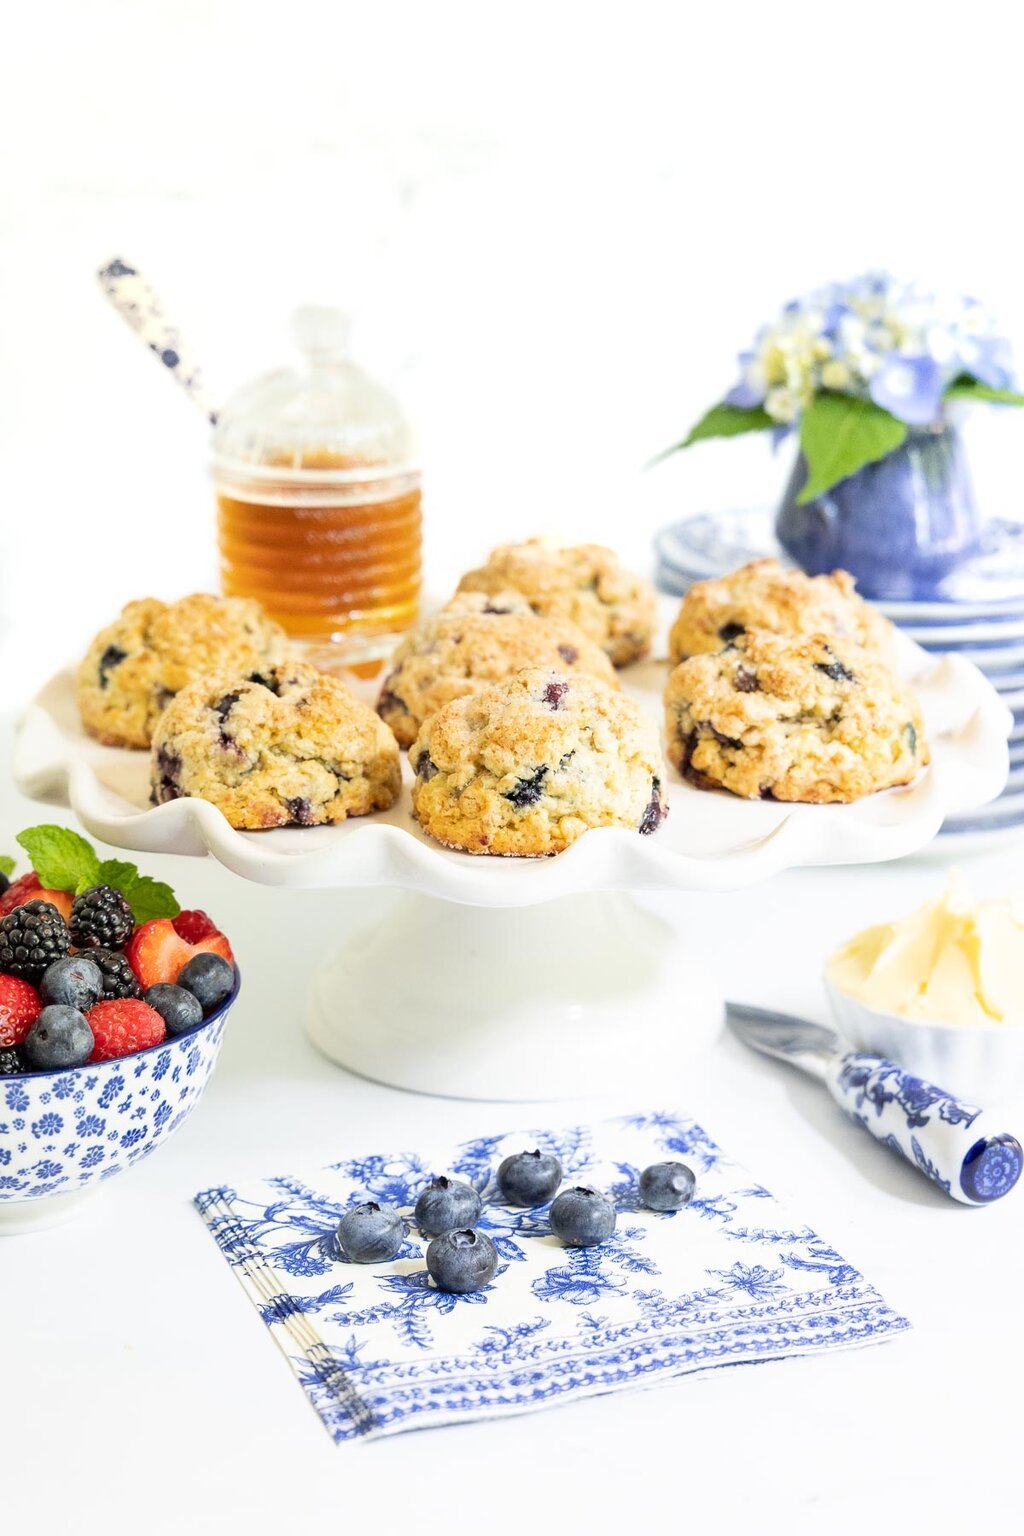 Vertical photo of a batch of Lemon Blueberry Scones on a scalloped pedestal serving plate surrounded by blueberries and other fruit.